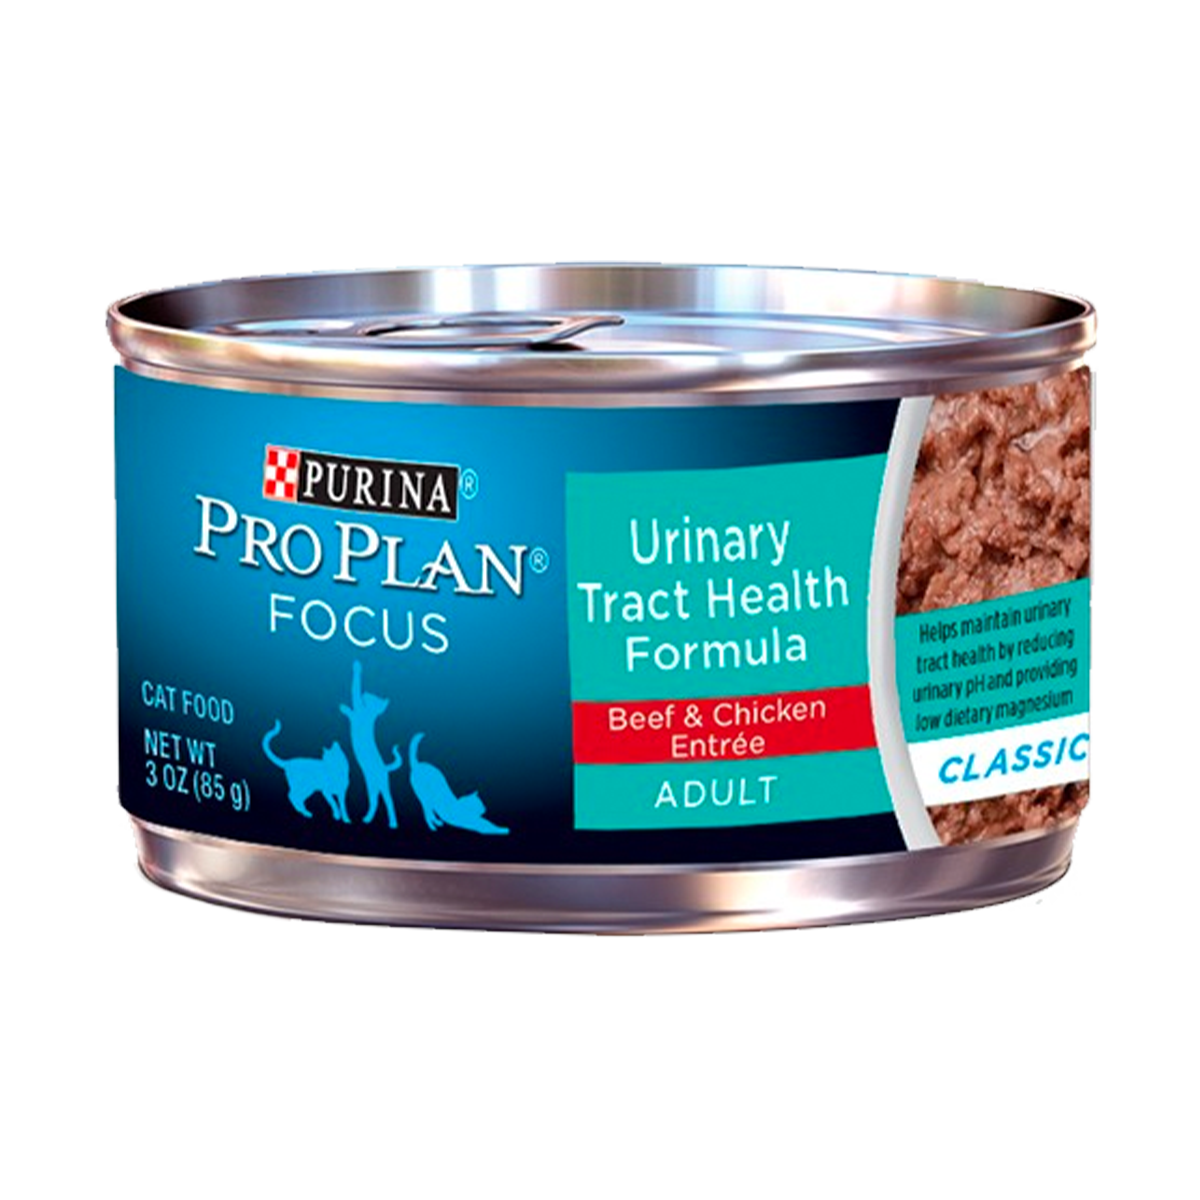 pro-plan-urinay-tract-health-formula-adult.png